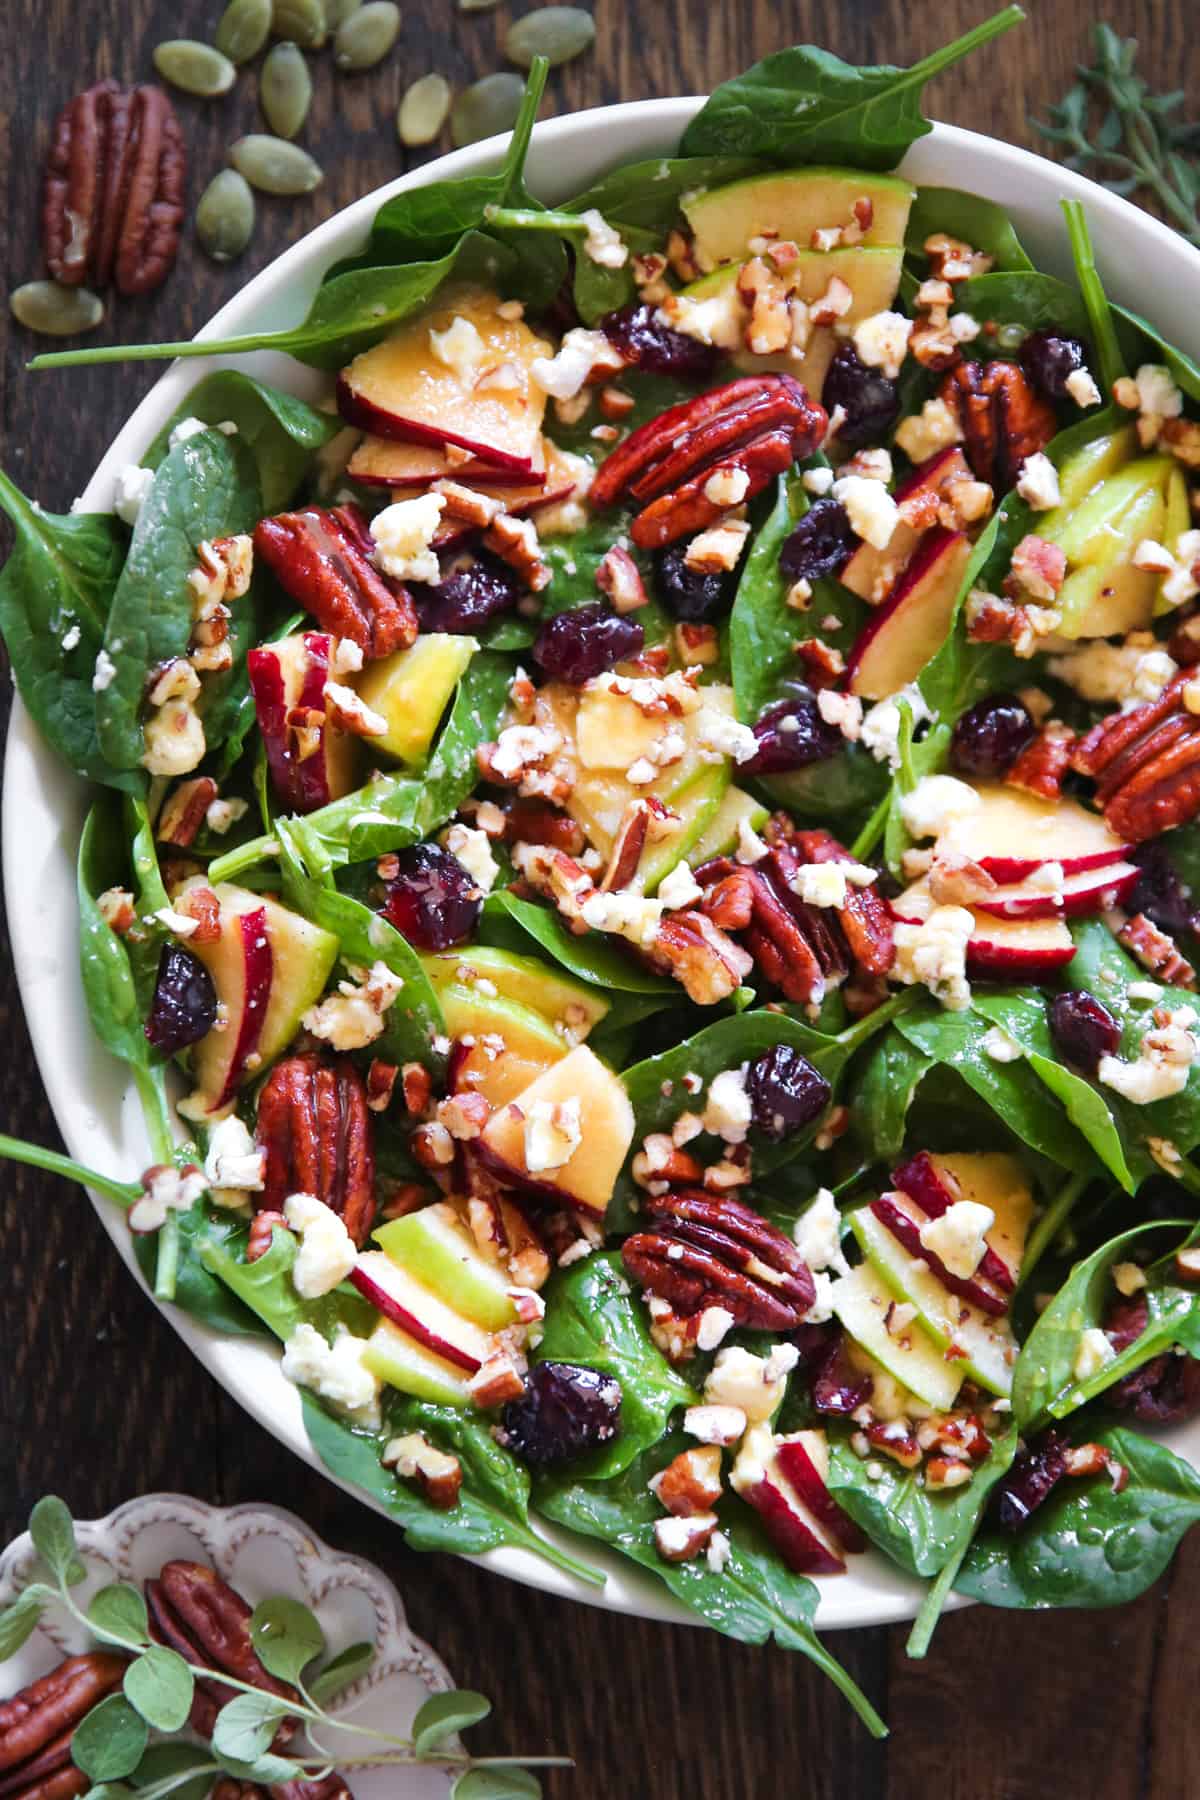 Apple Spinach Salad with Cranberries, Pecans, and Goat Cheese in a white bowl.